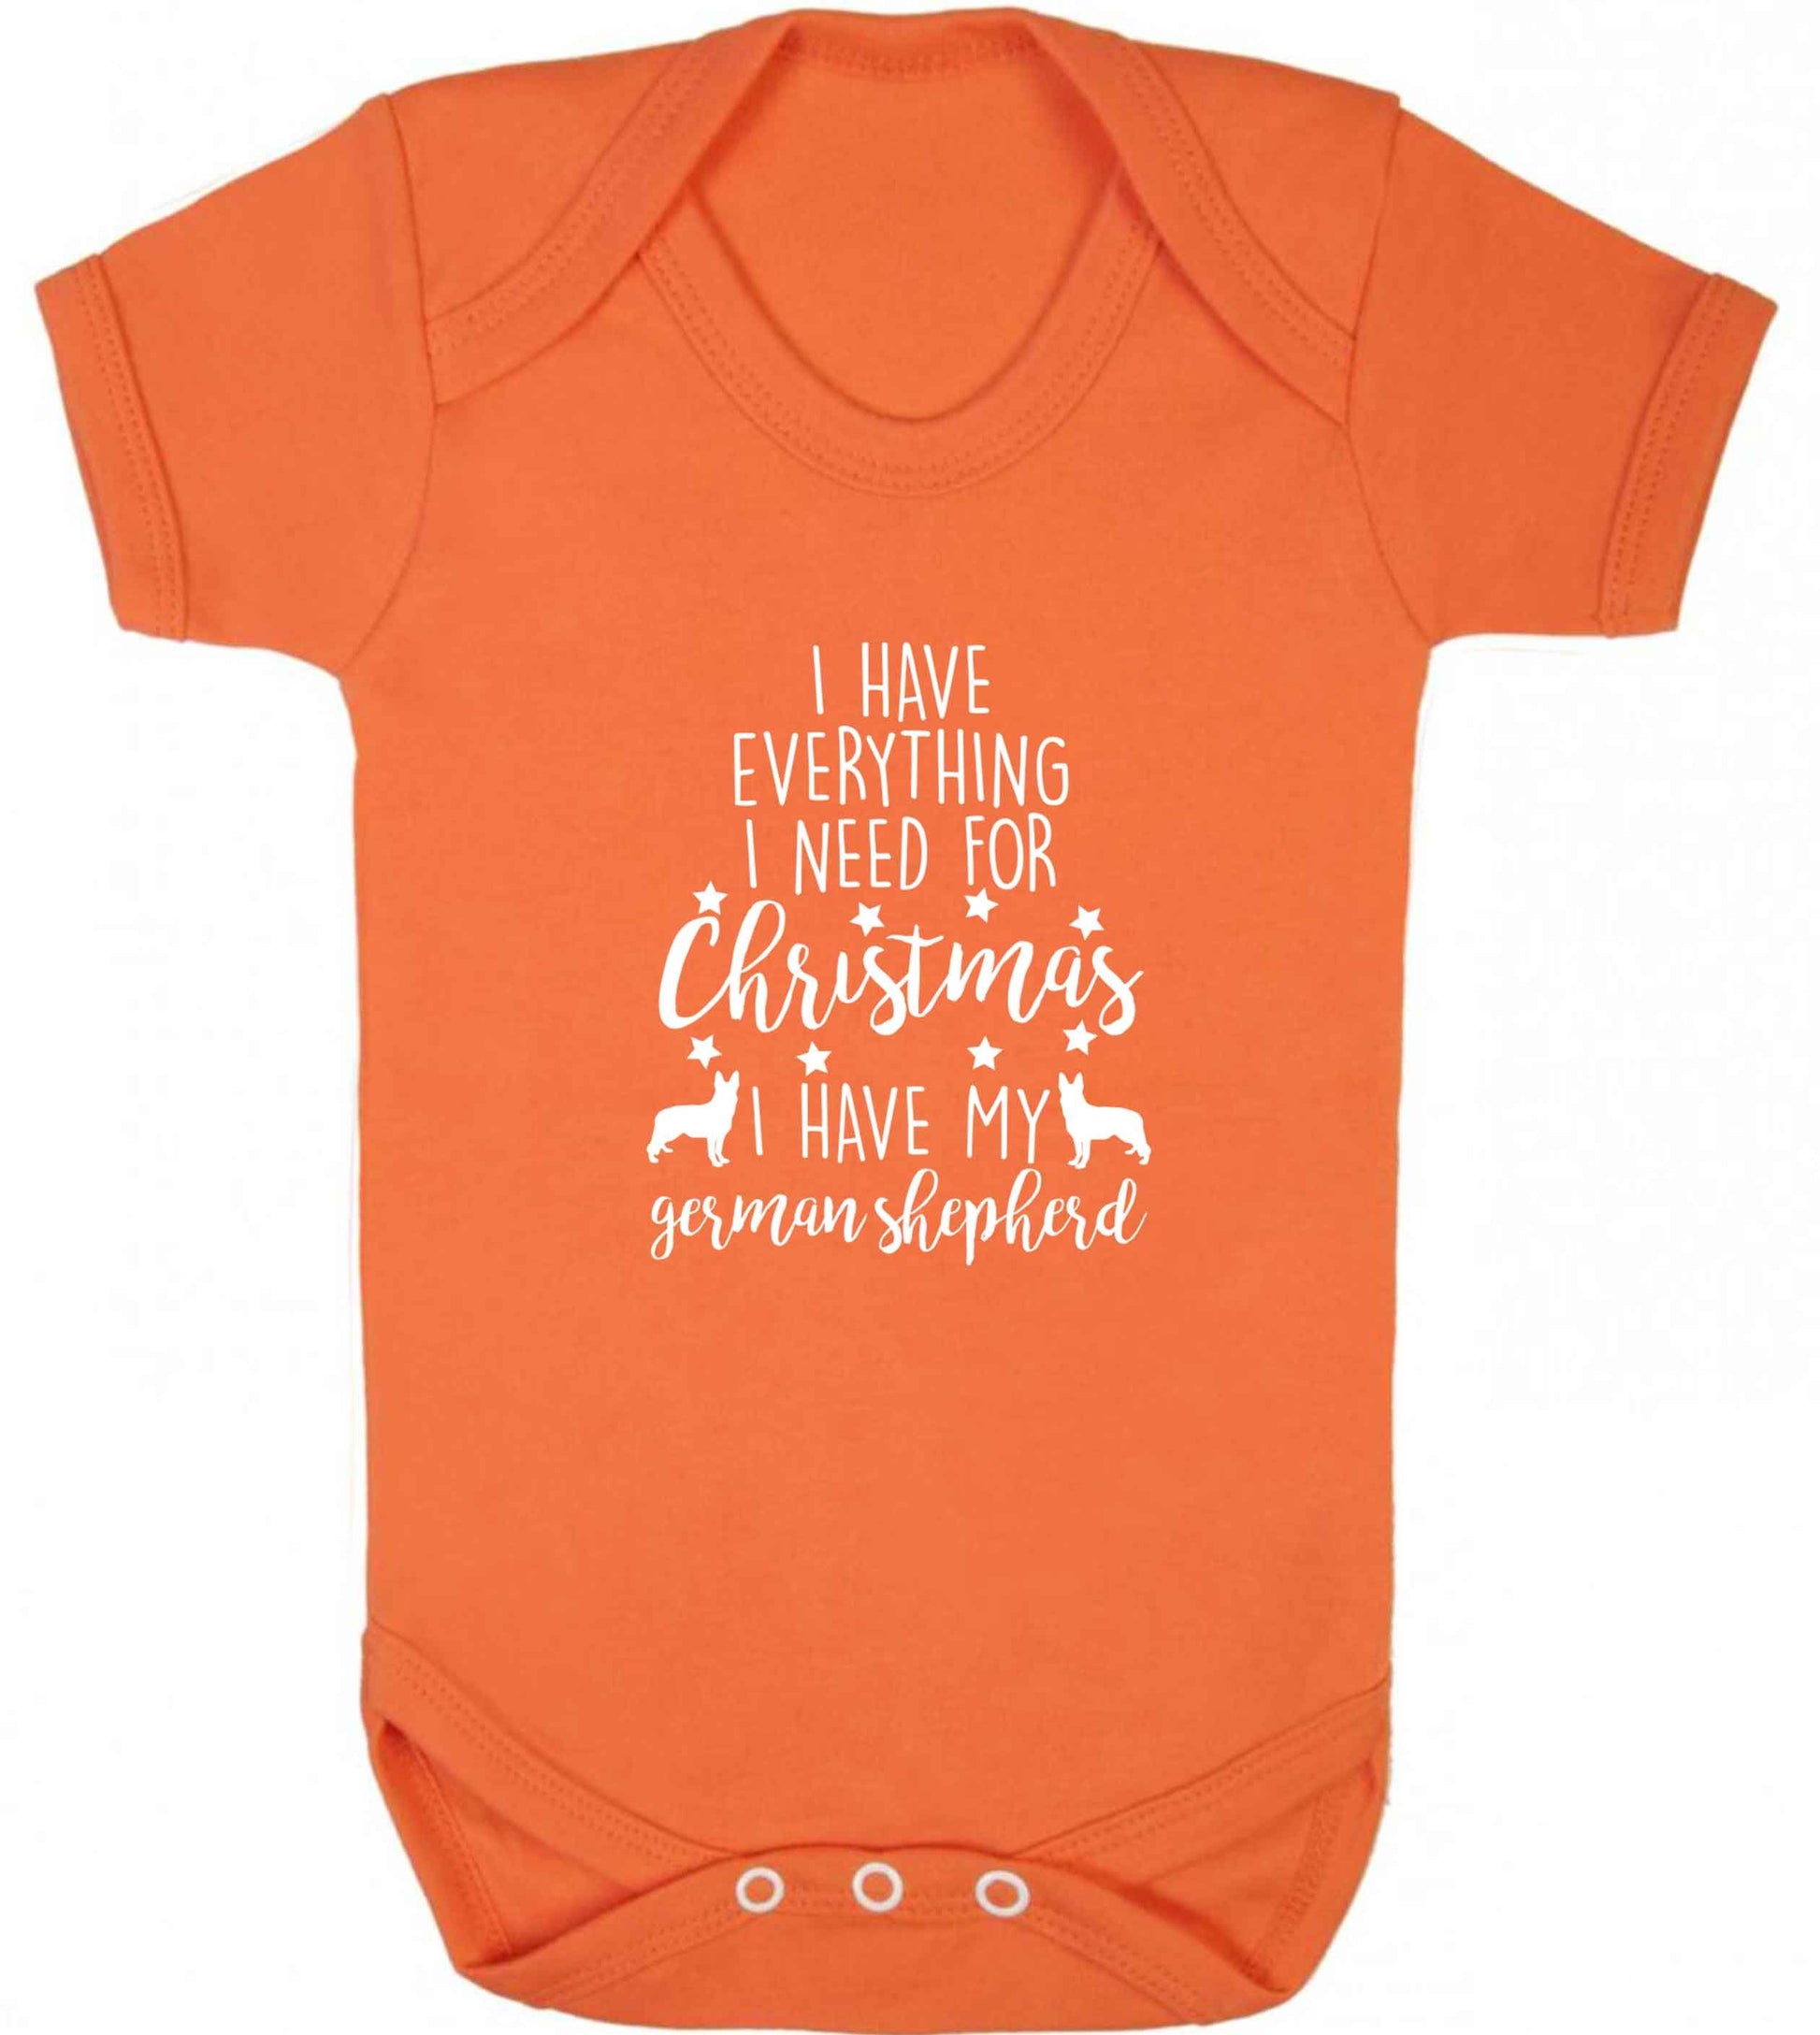 I have everything I need for Christmas I have my german shepherd baby vest orange 18-24 months